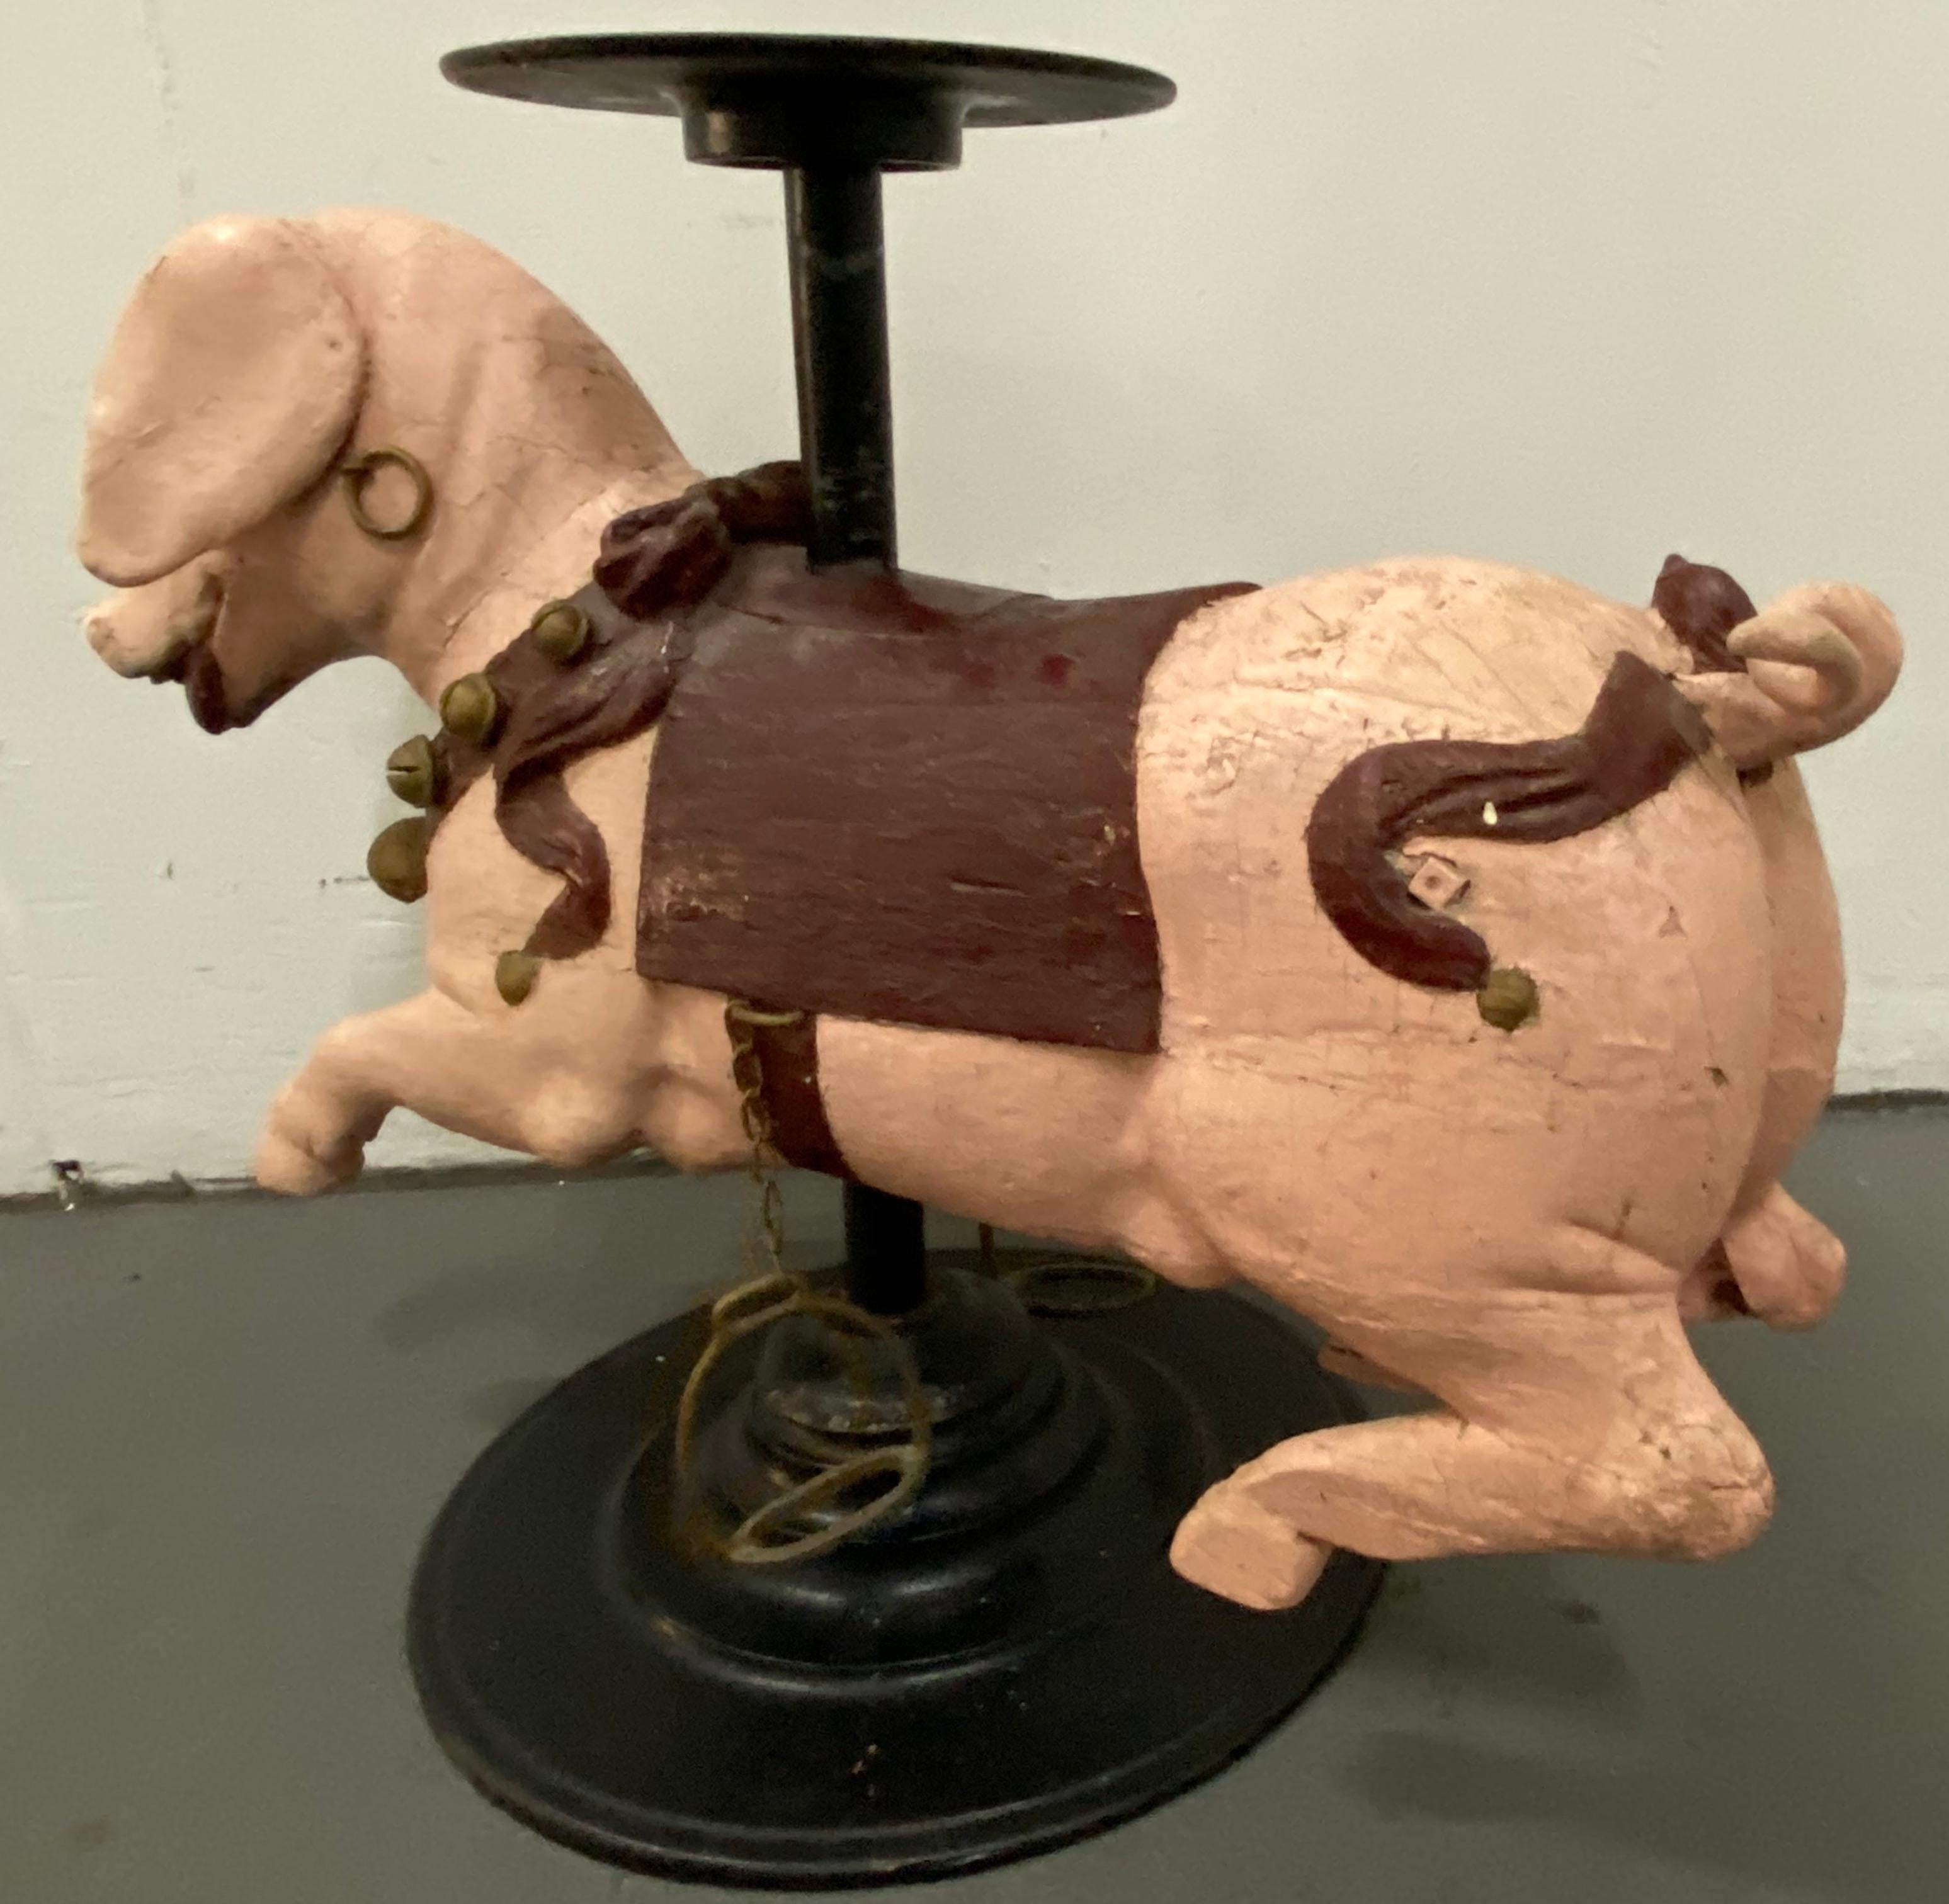 19th century French carved and painted Carousel pig on stand

Large hand carved and painted antique French carousel pig

The pig may have been repainted over the years

The stand is included for display purposes

Pig dimensions 36